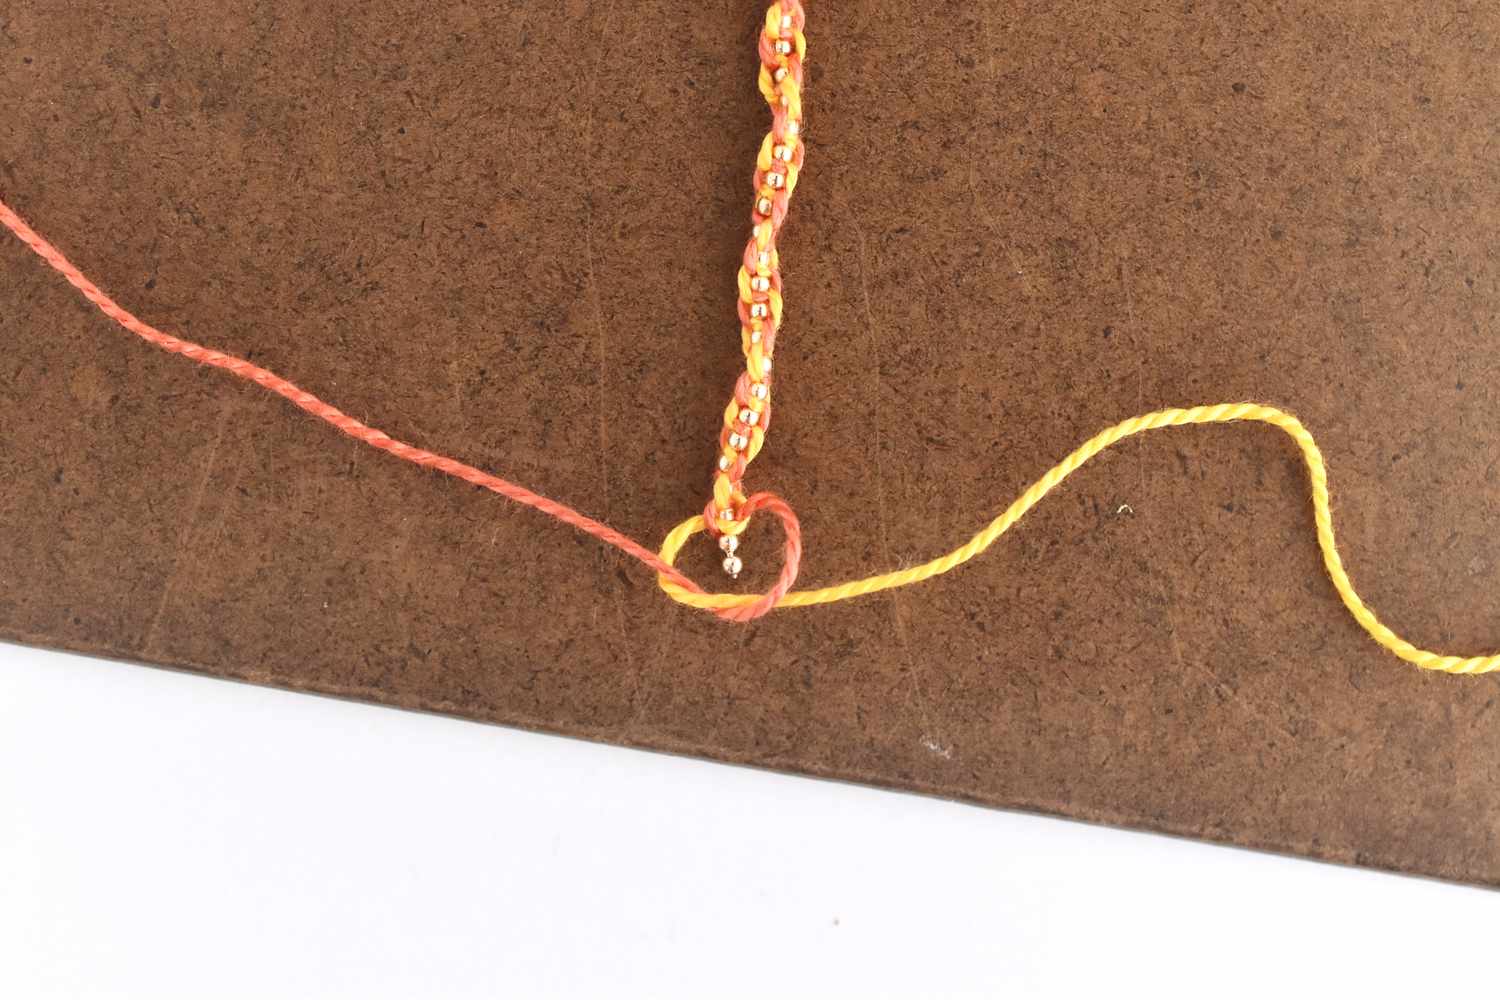 Tie a Square Knot at the End of the Bracelet